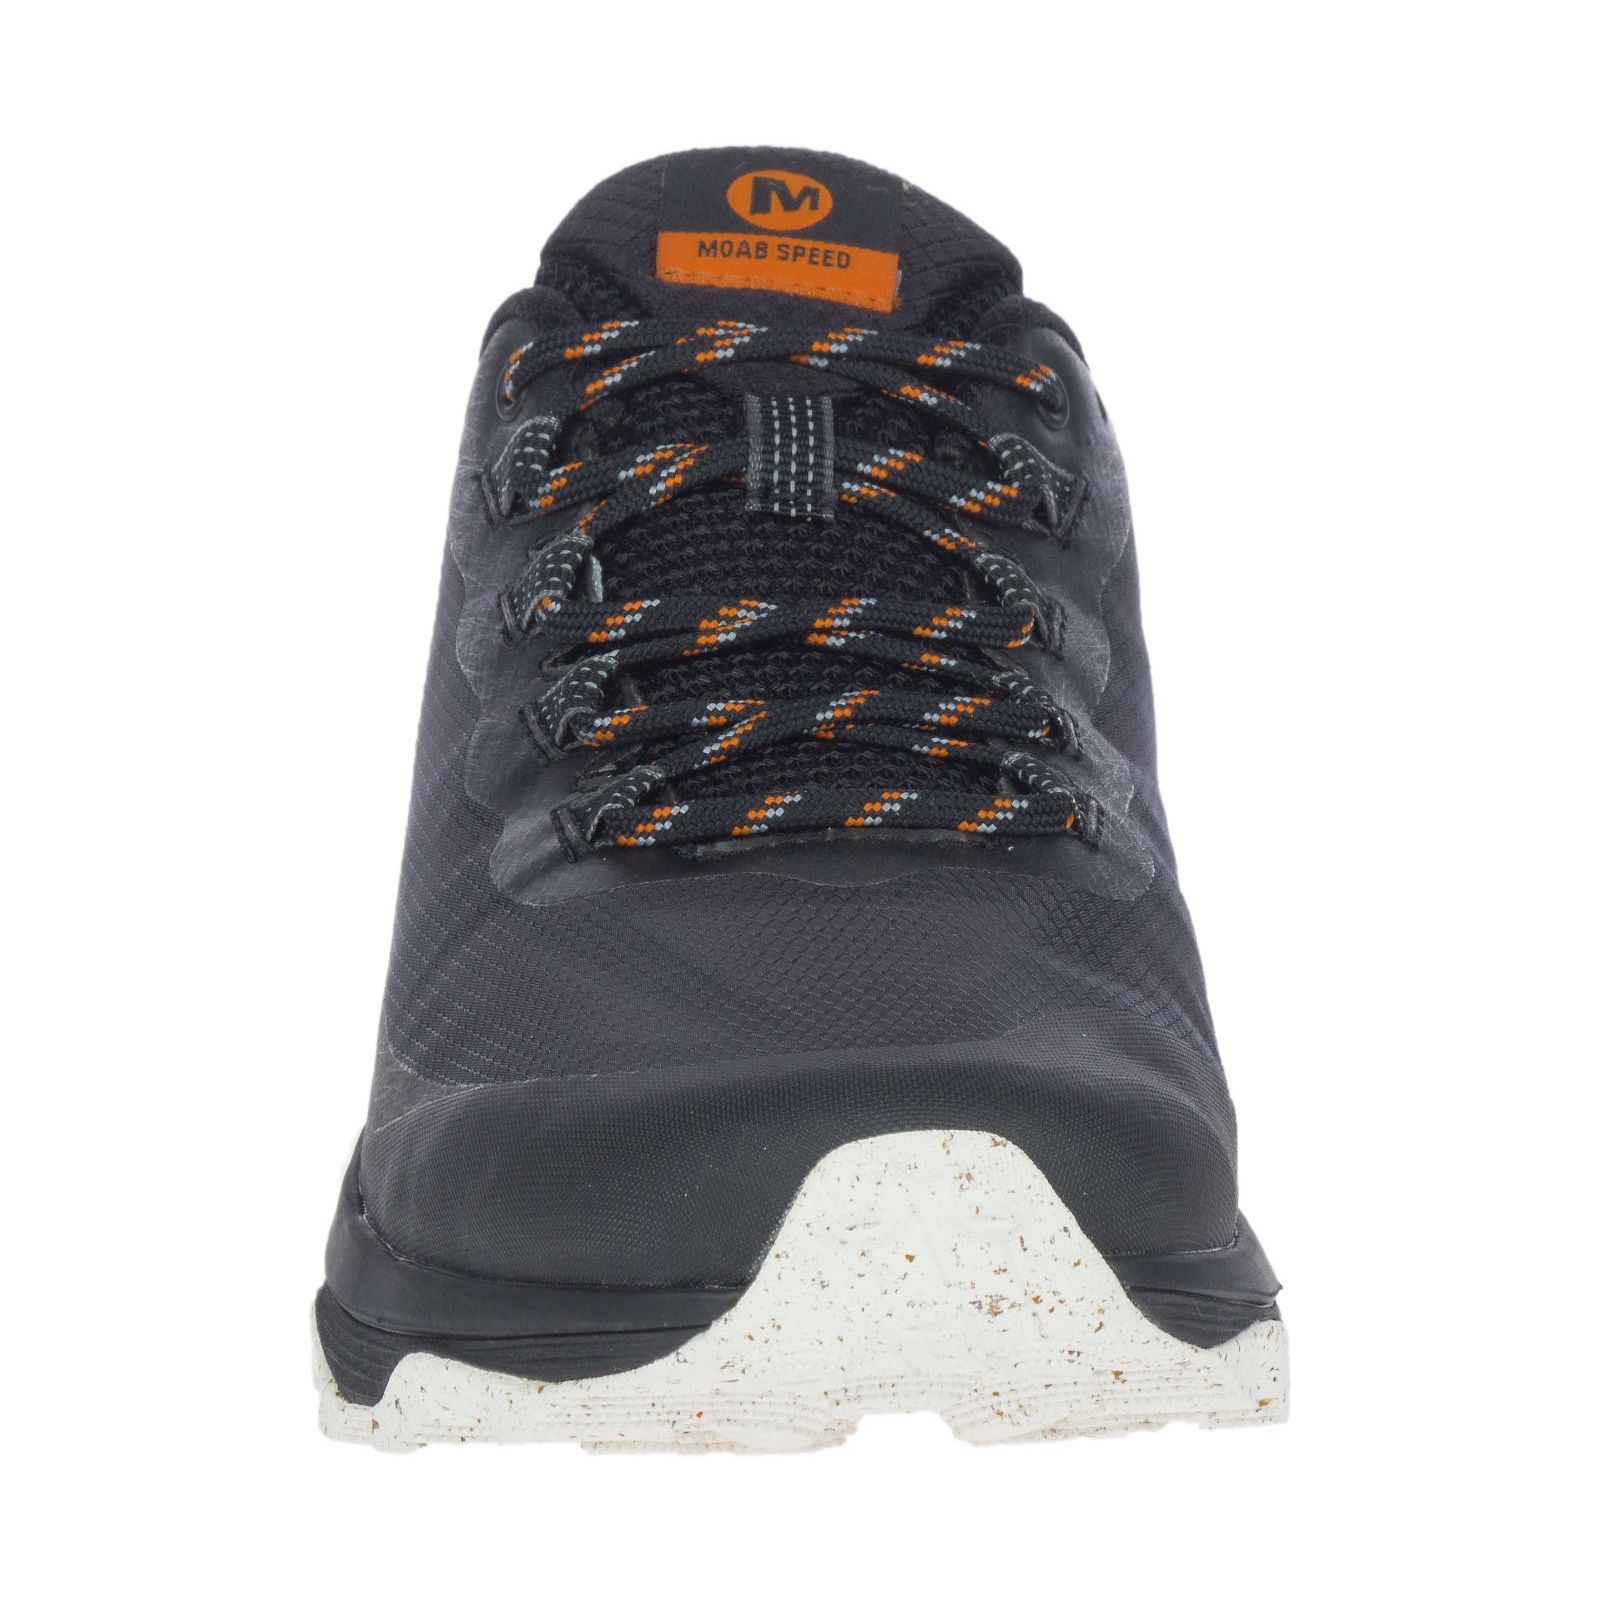 Shoes | Merrell Moab Speed | Outdoor